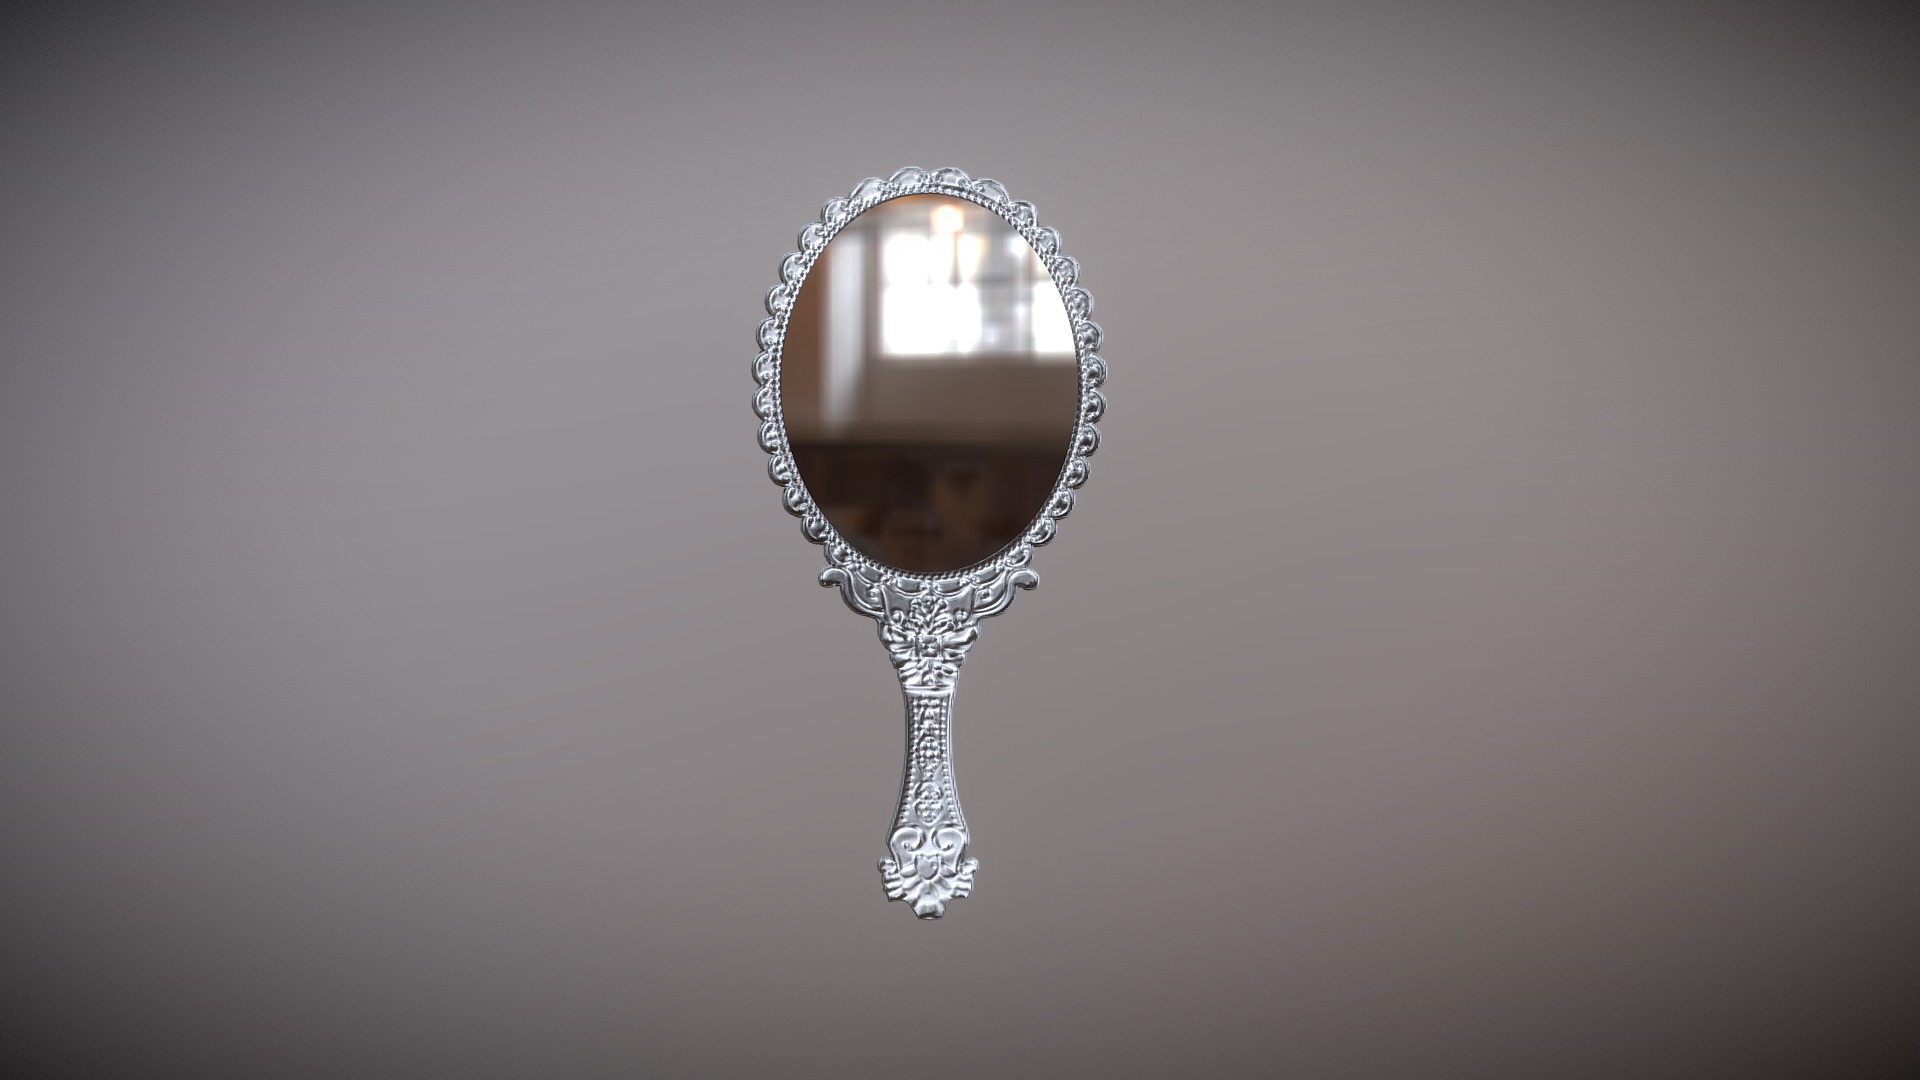 3D model December 6: reflection - This is a 3D model of the December 6: reflection. The 3D model is about a silver ring with a diamond.